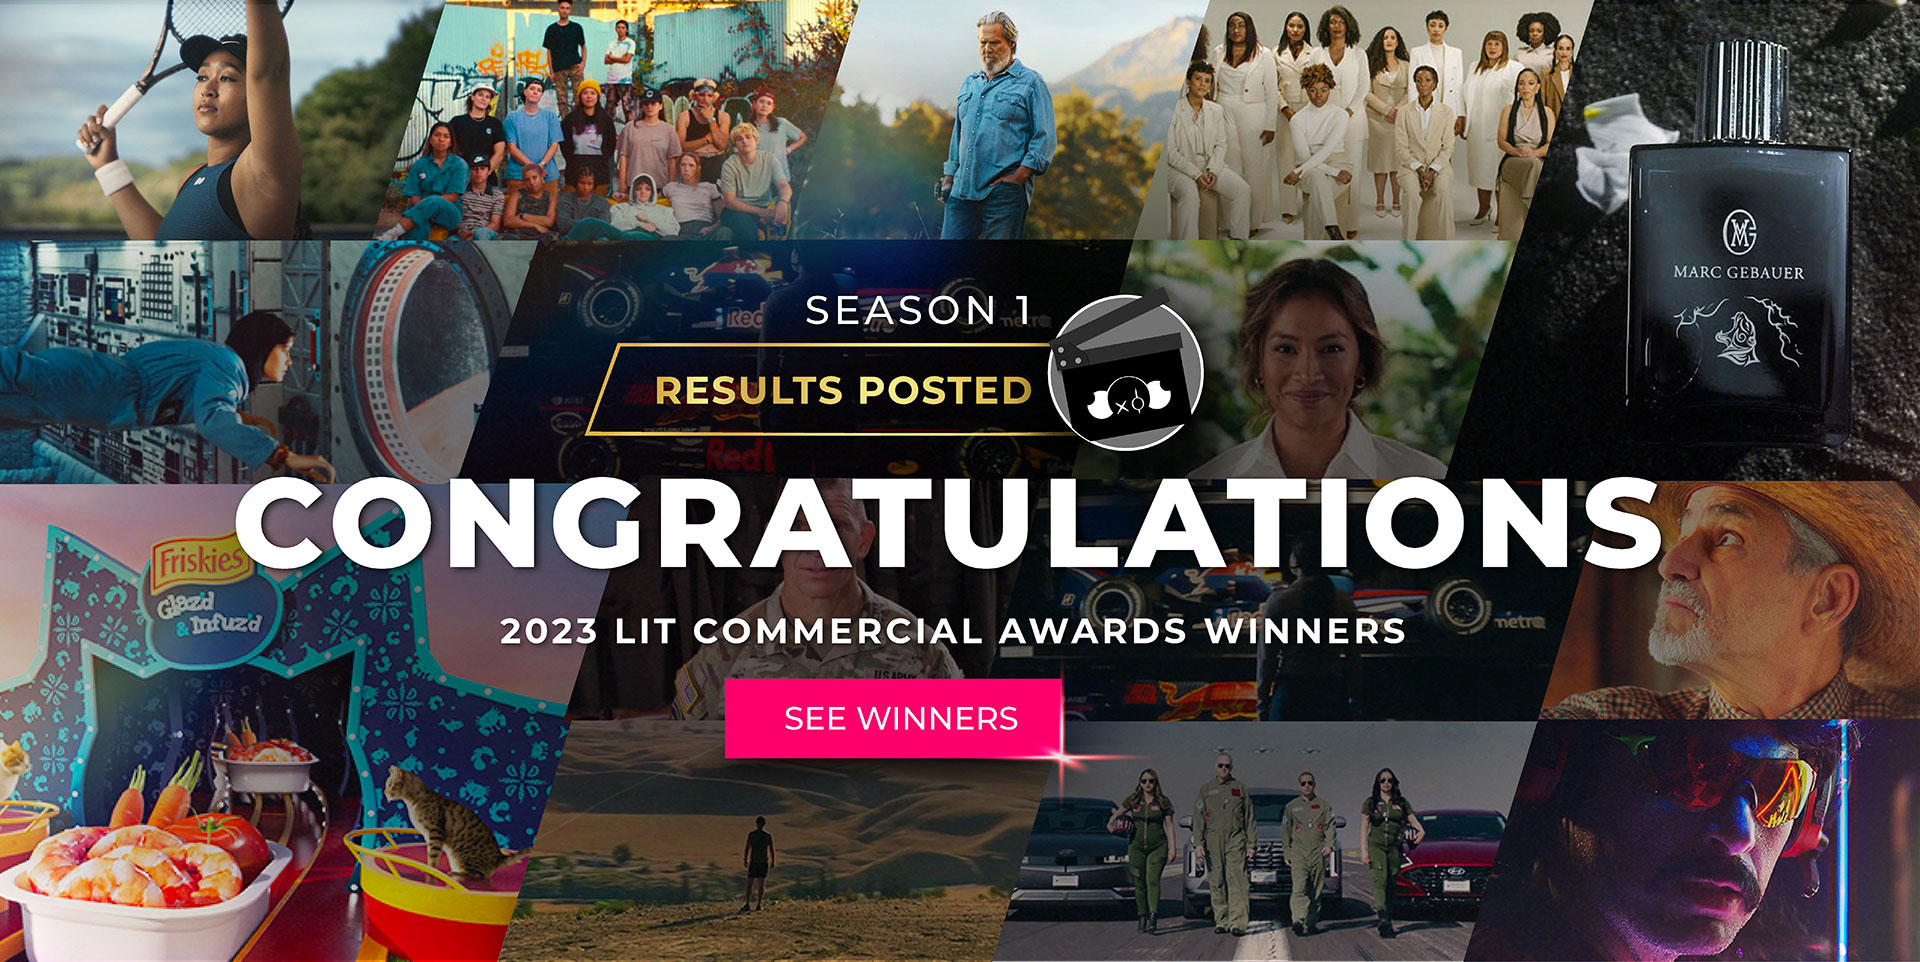 2023 LIT Commercial Awards Announces Platinum and Gold Winners of Season 1